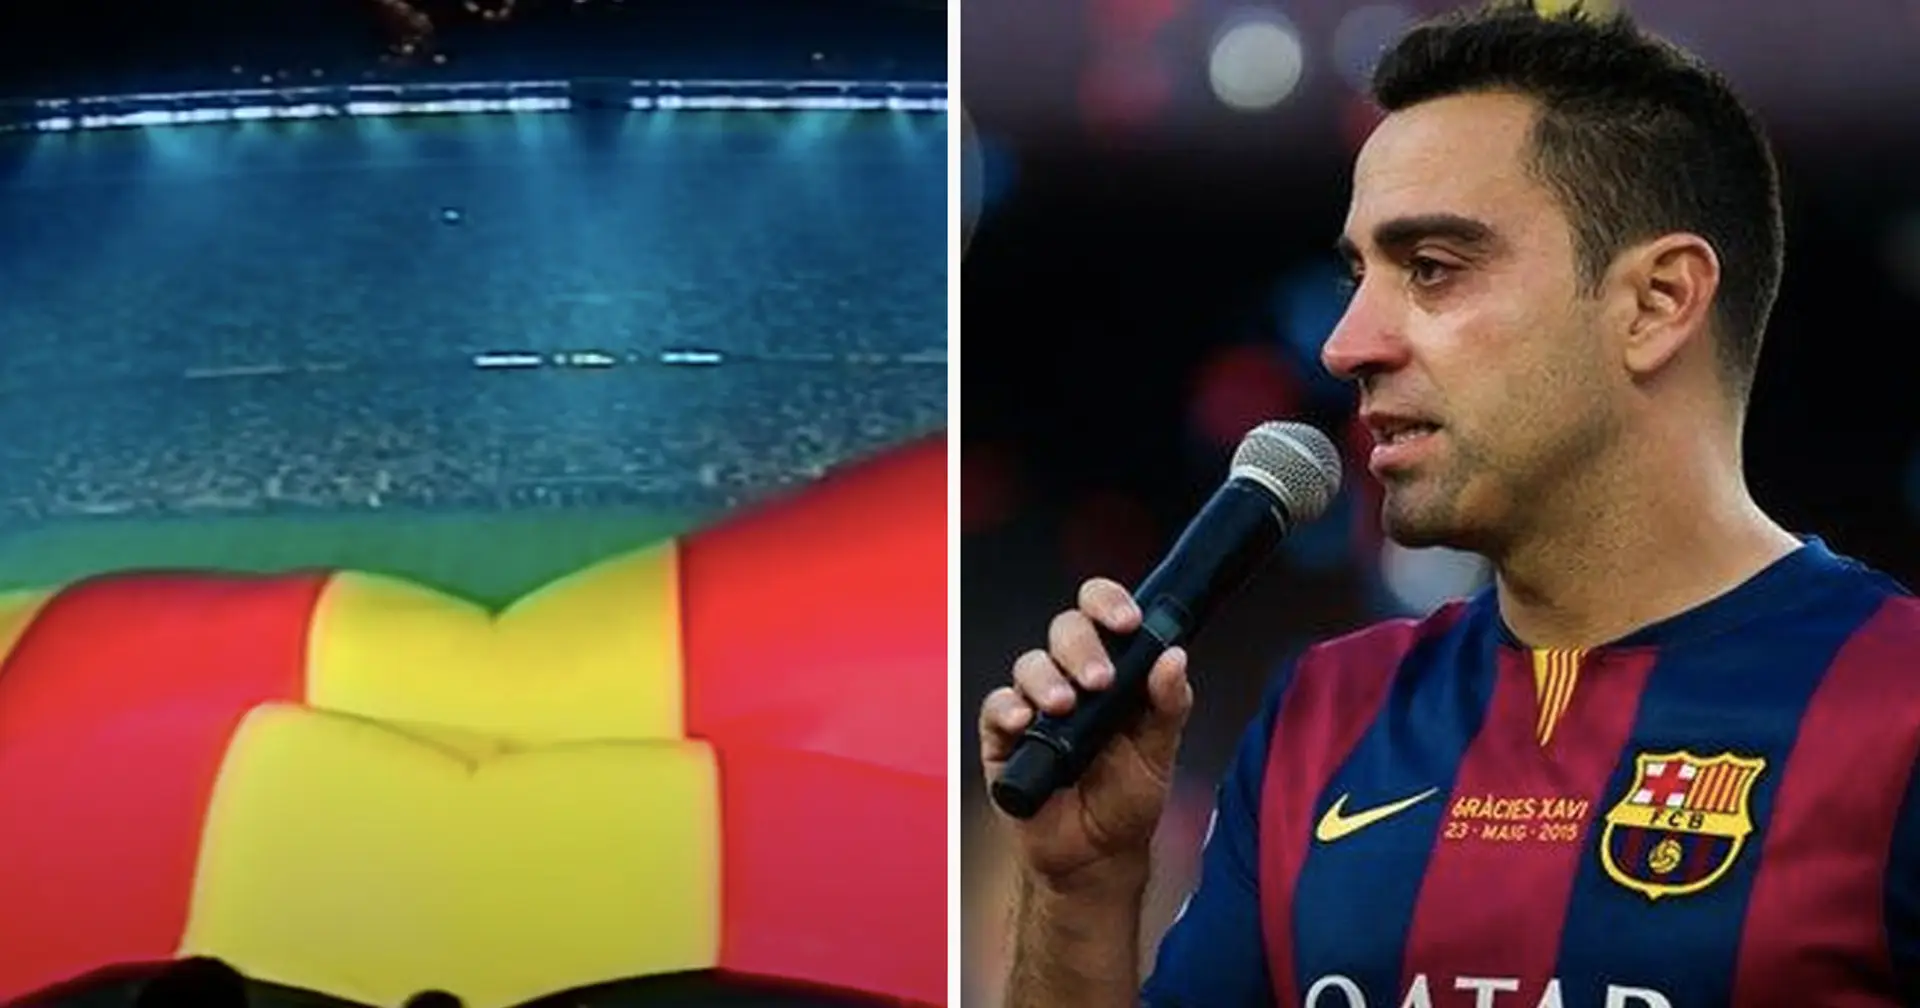 'They gave us a lesson of democracy': Recalling one El Clasico that left a lasting impact on Xavi